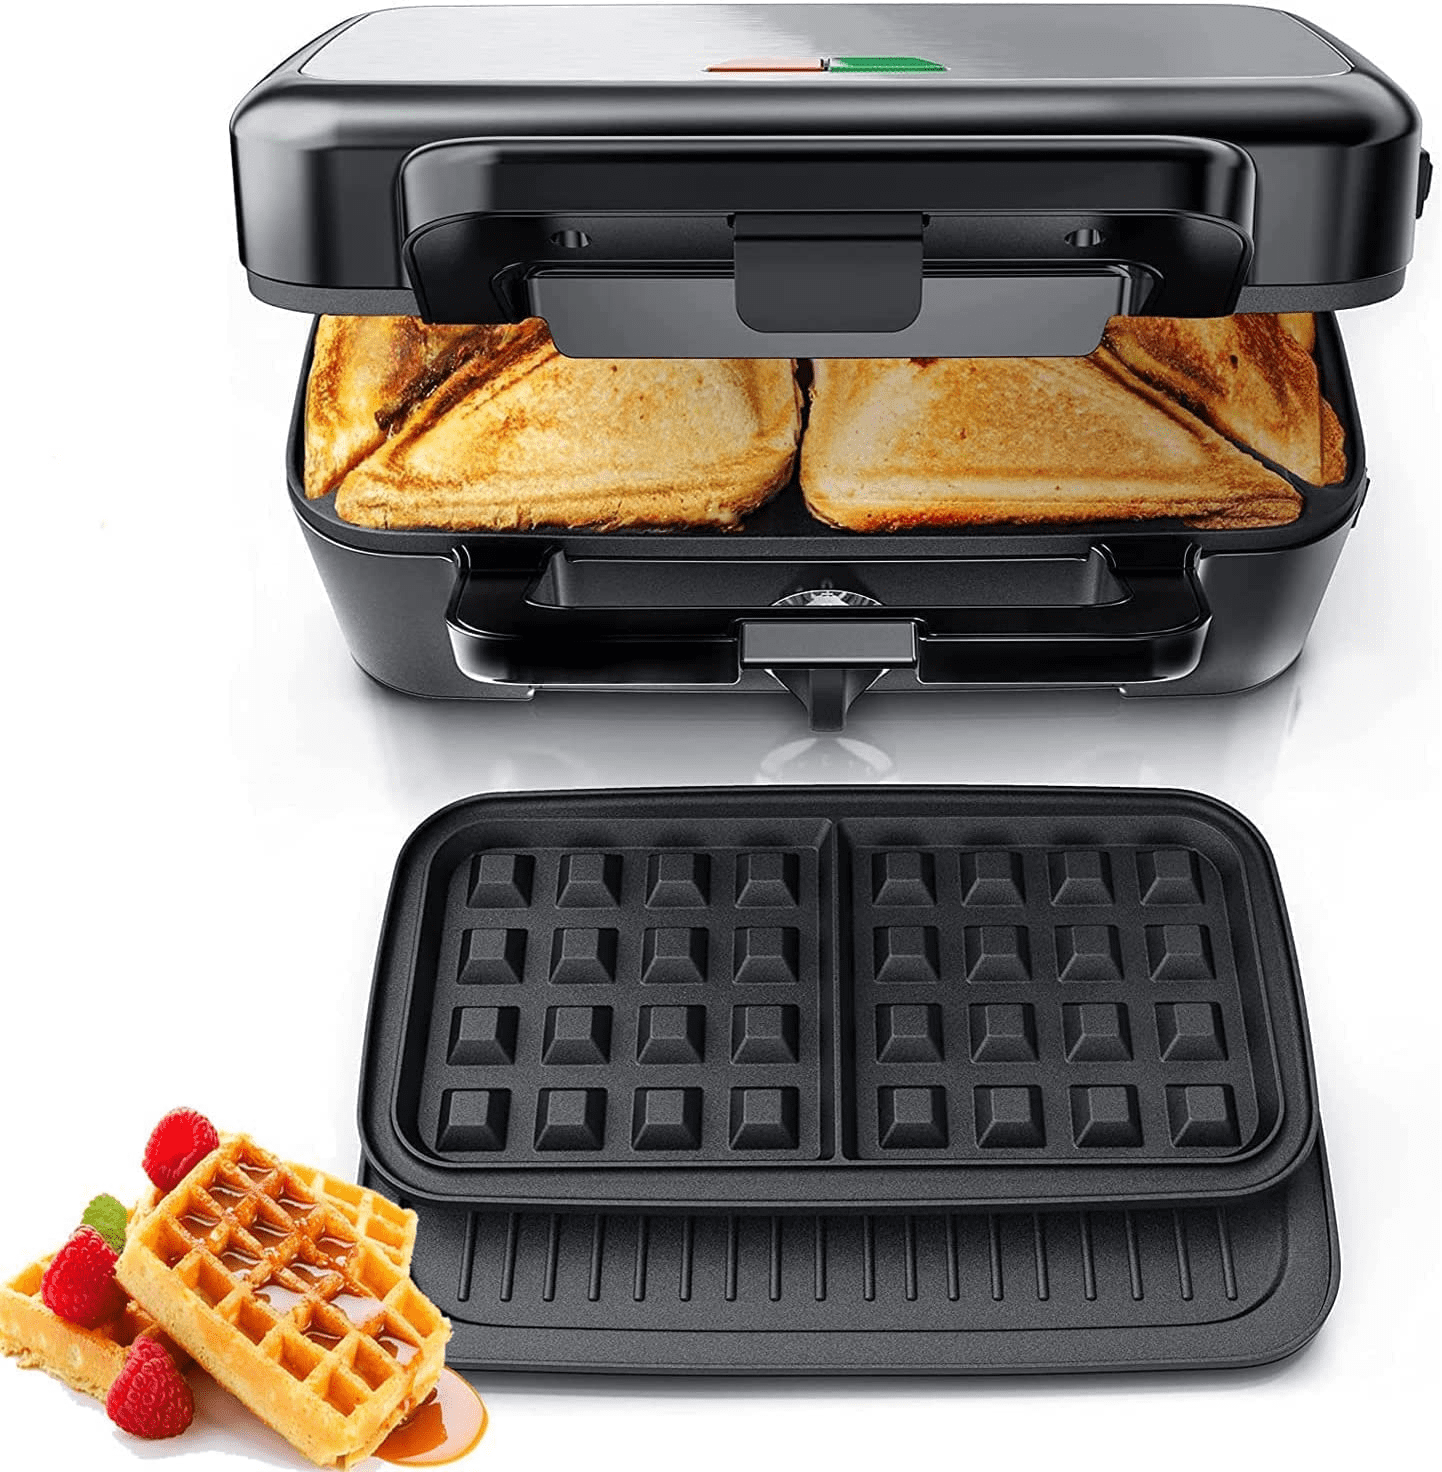 3-in-1 Sandwich Maker with Removable Plates, FOHERE Waffle and Panini Press Grill, 1200W, Black -